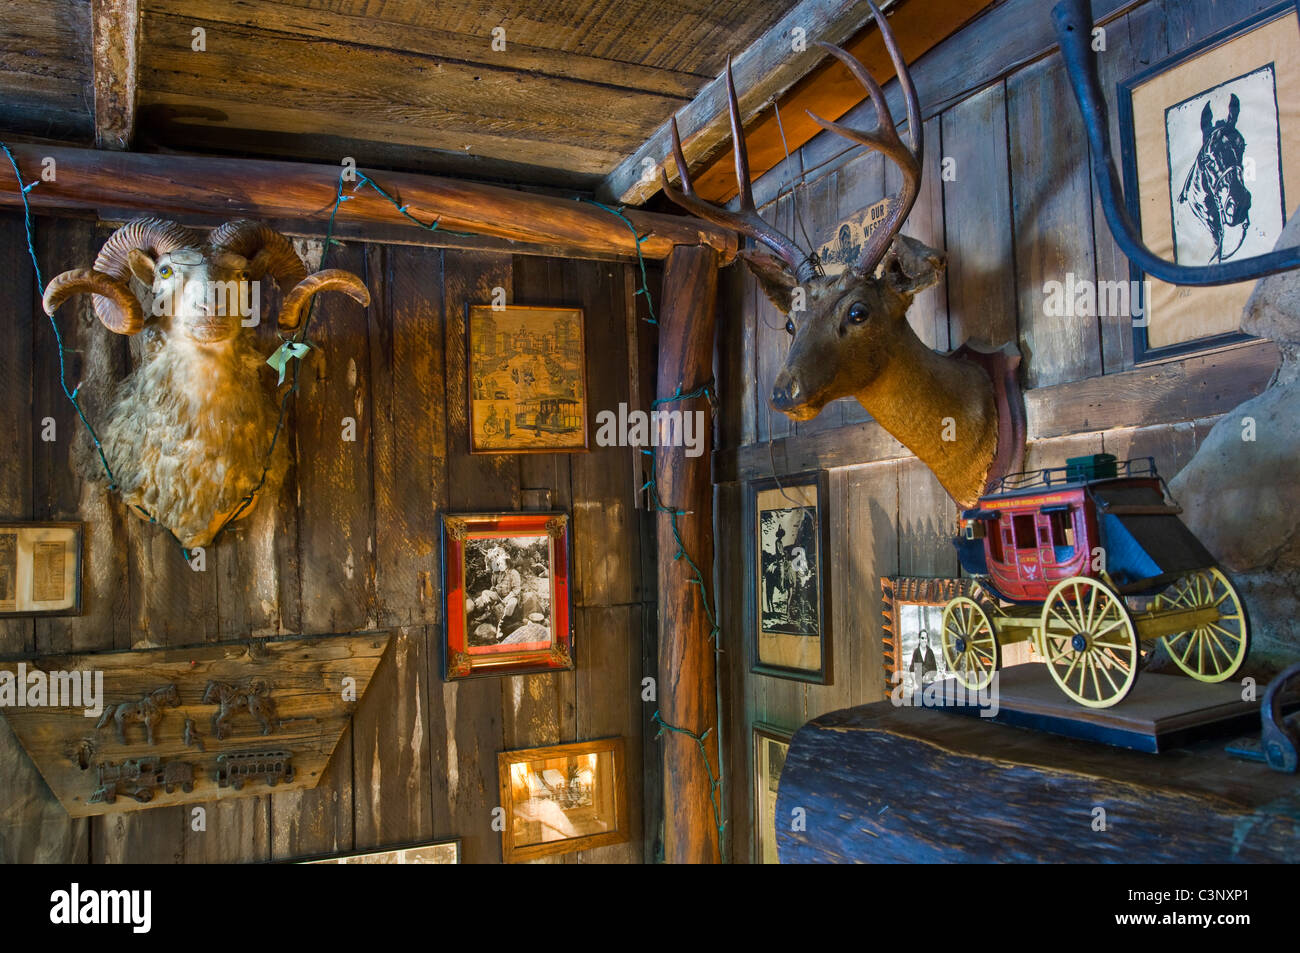 Rustic interior of the Cold Springs Tavern, on the historic stage coach route between Santa Ynez and Santa Barbara, California Stock Photo